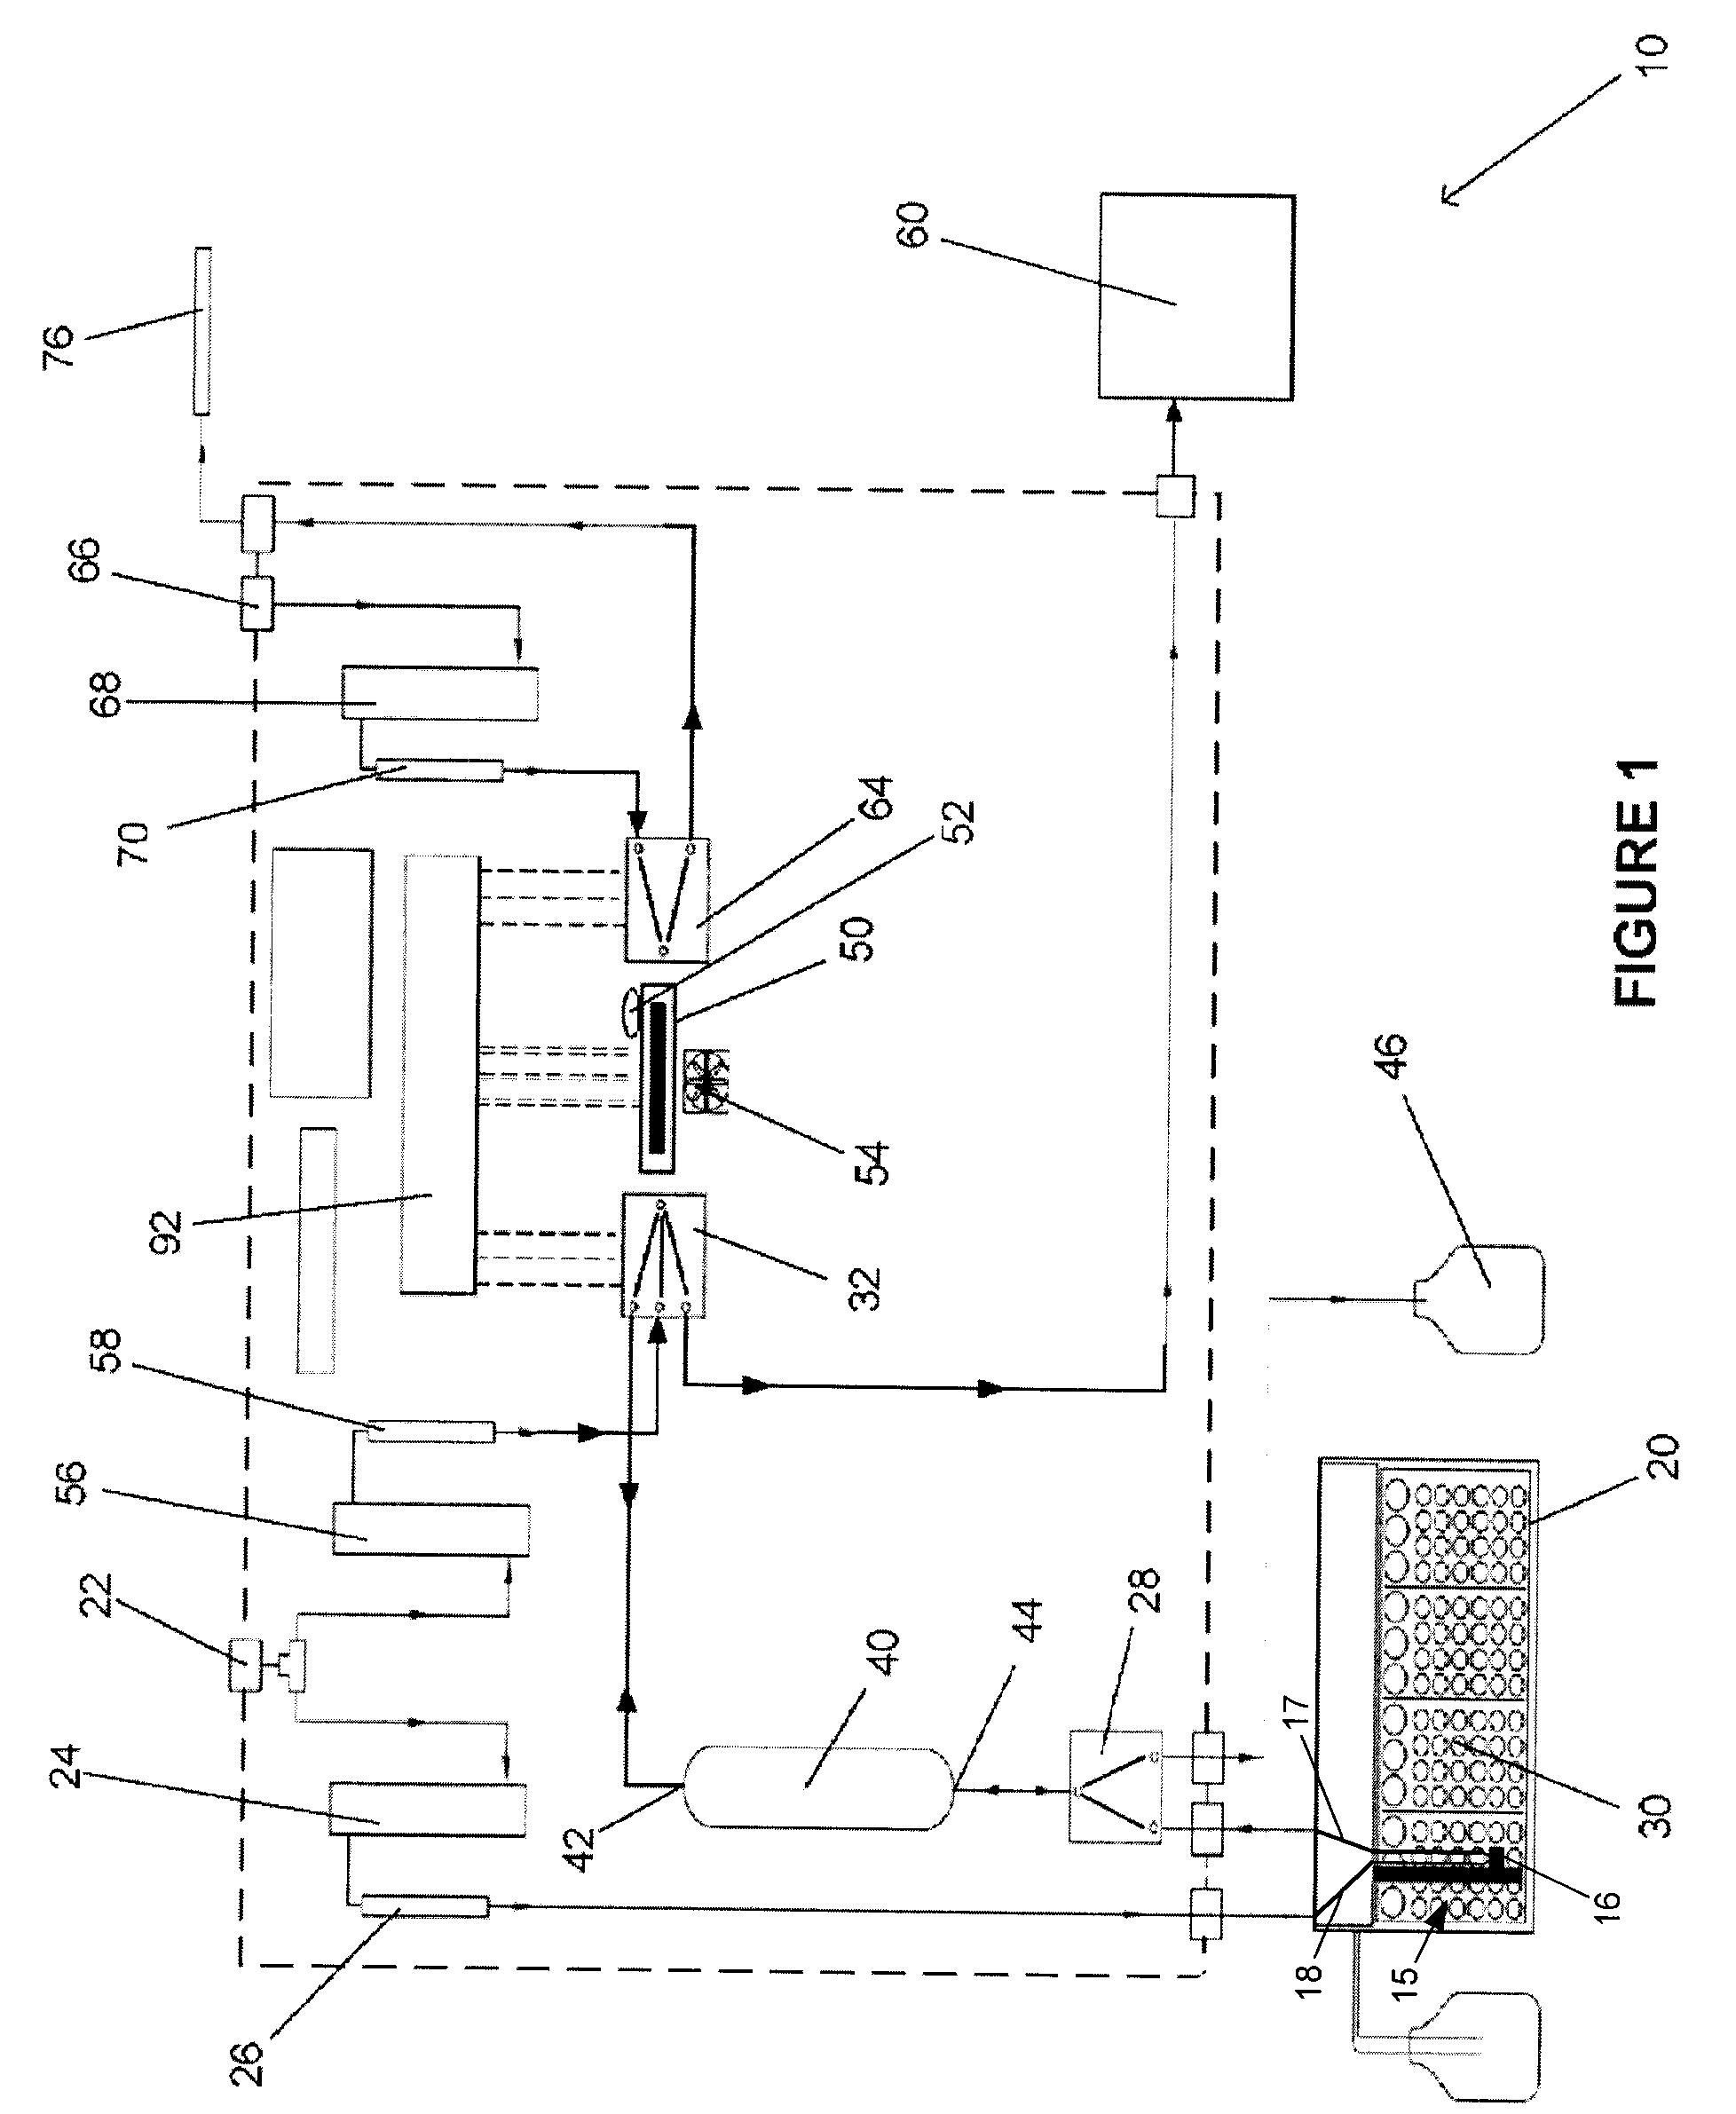 Automated system for detection of chemical compounds